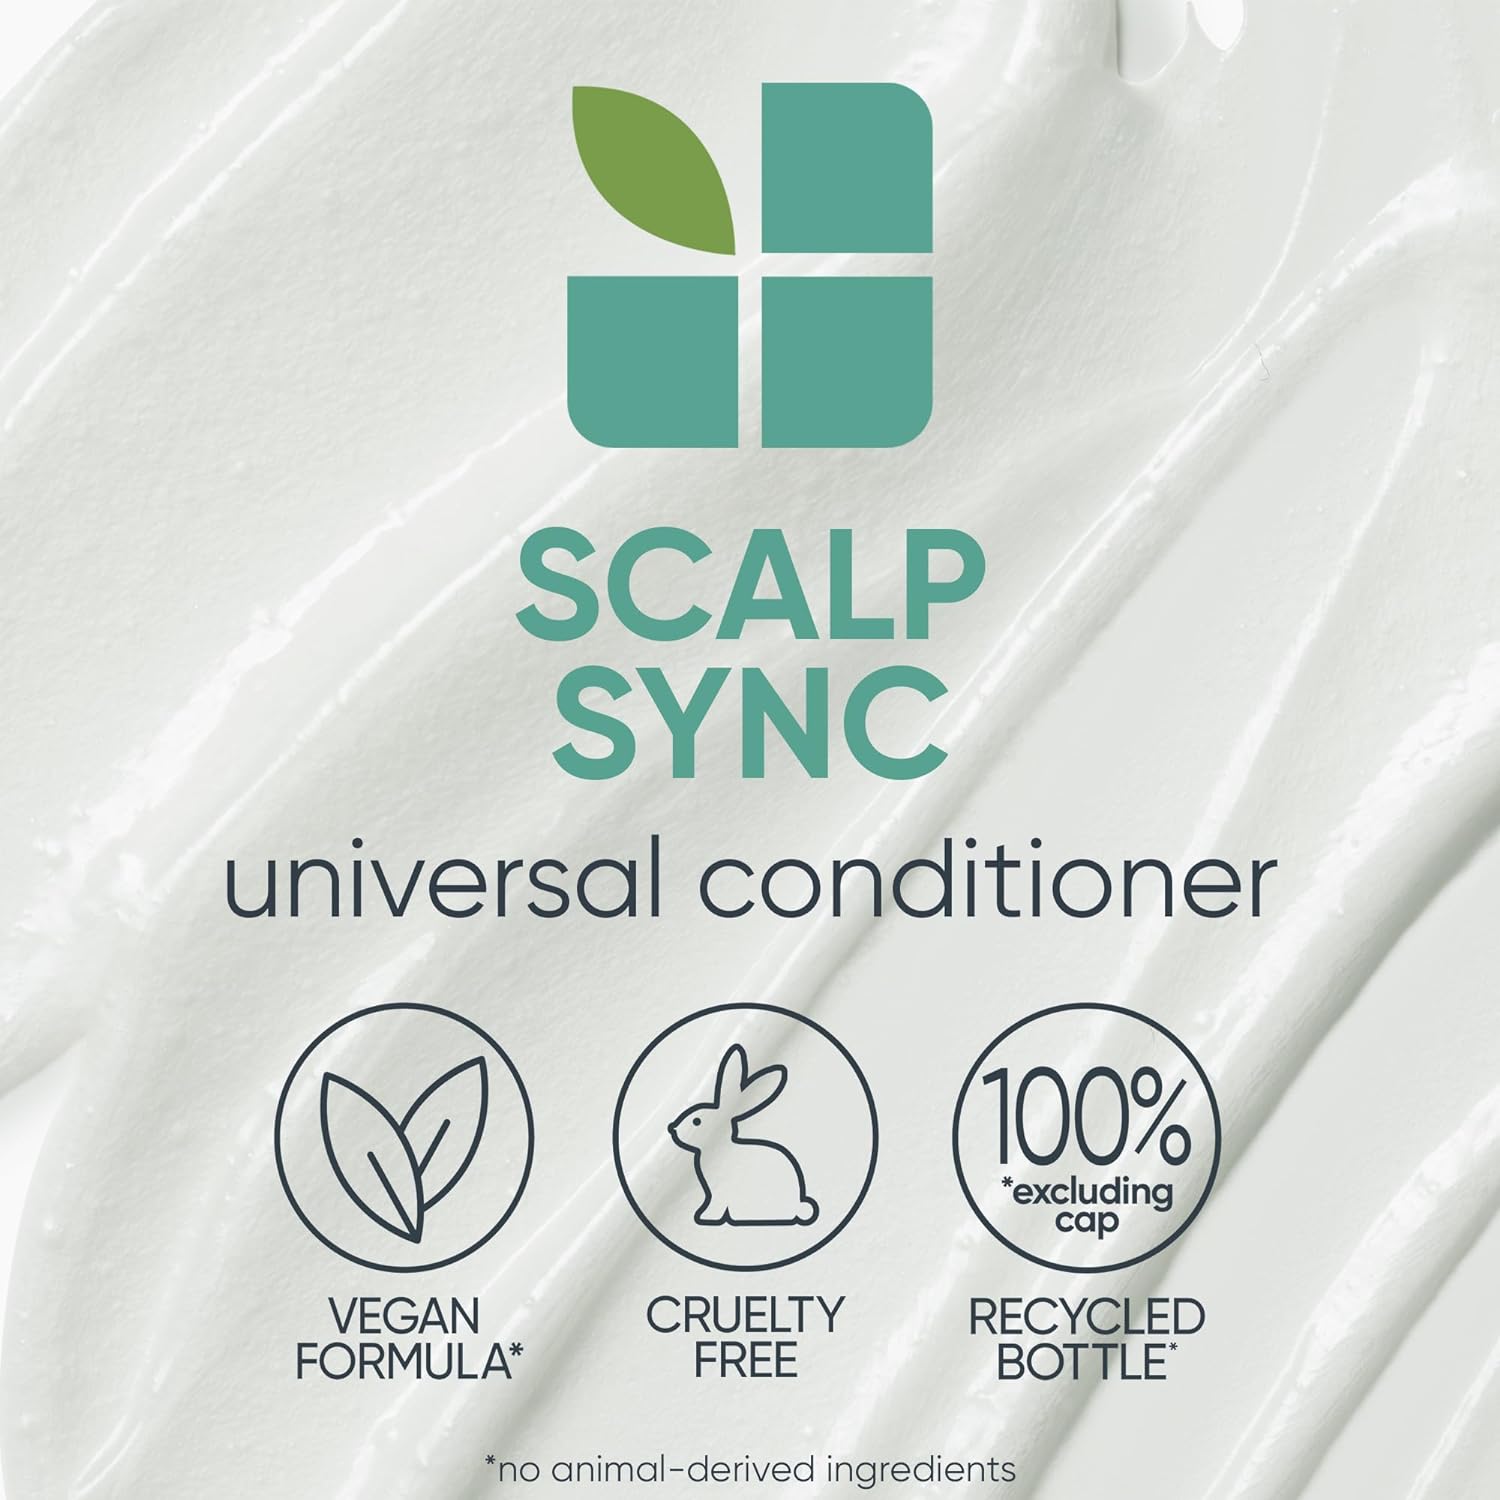 Biolage Scalp Sync Universal Conditioner | Lightweight Conditioner For All Scalp Types | Paraben & Sulfate Free | For Sensitive Scalps | Vegan & Cruelty Free | Salon Shampoo : Beauty & Personal Care